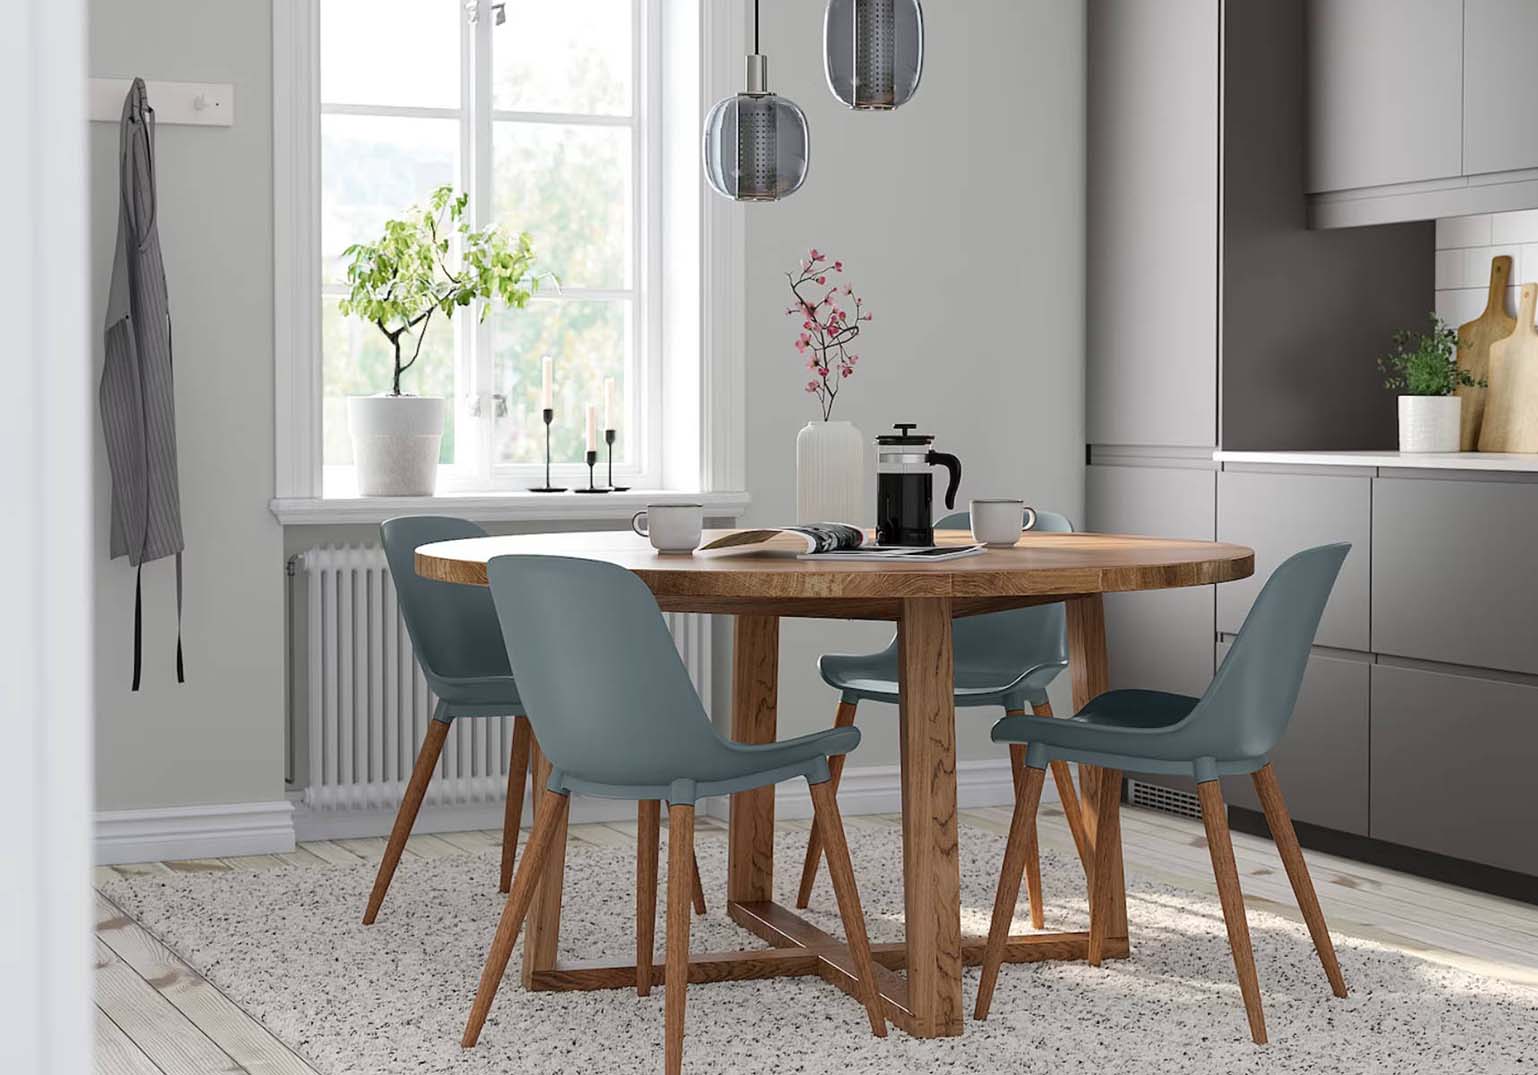 Revamp Your Dining Area: Meet the Signature Dining Table Sets for Inspired Living